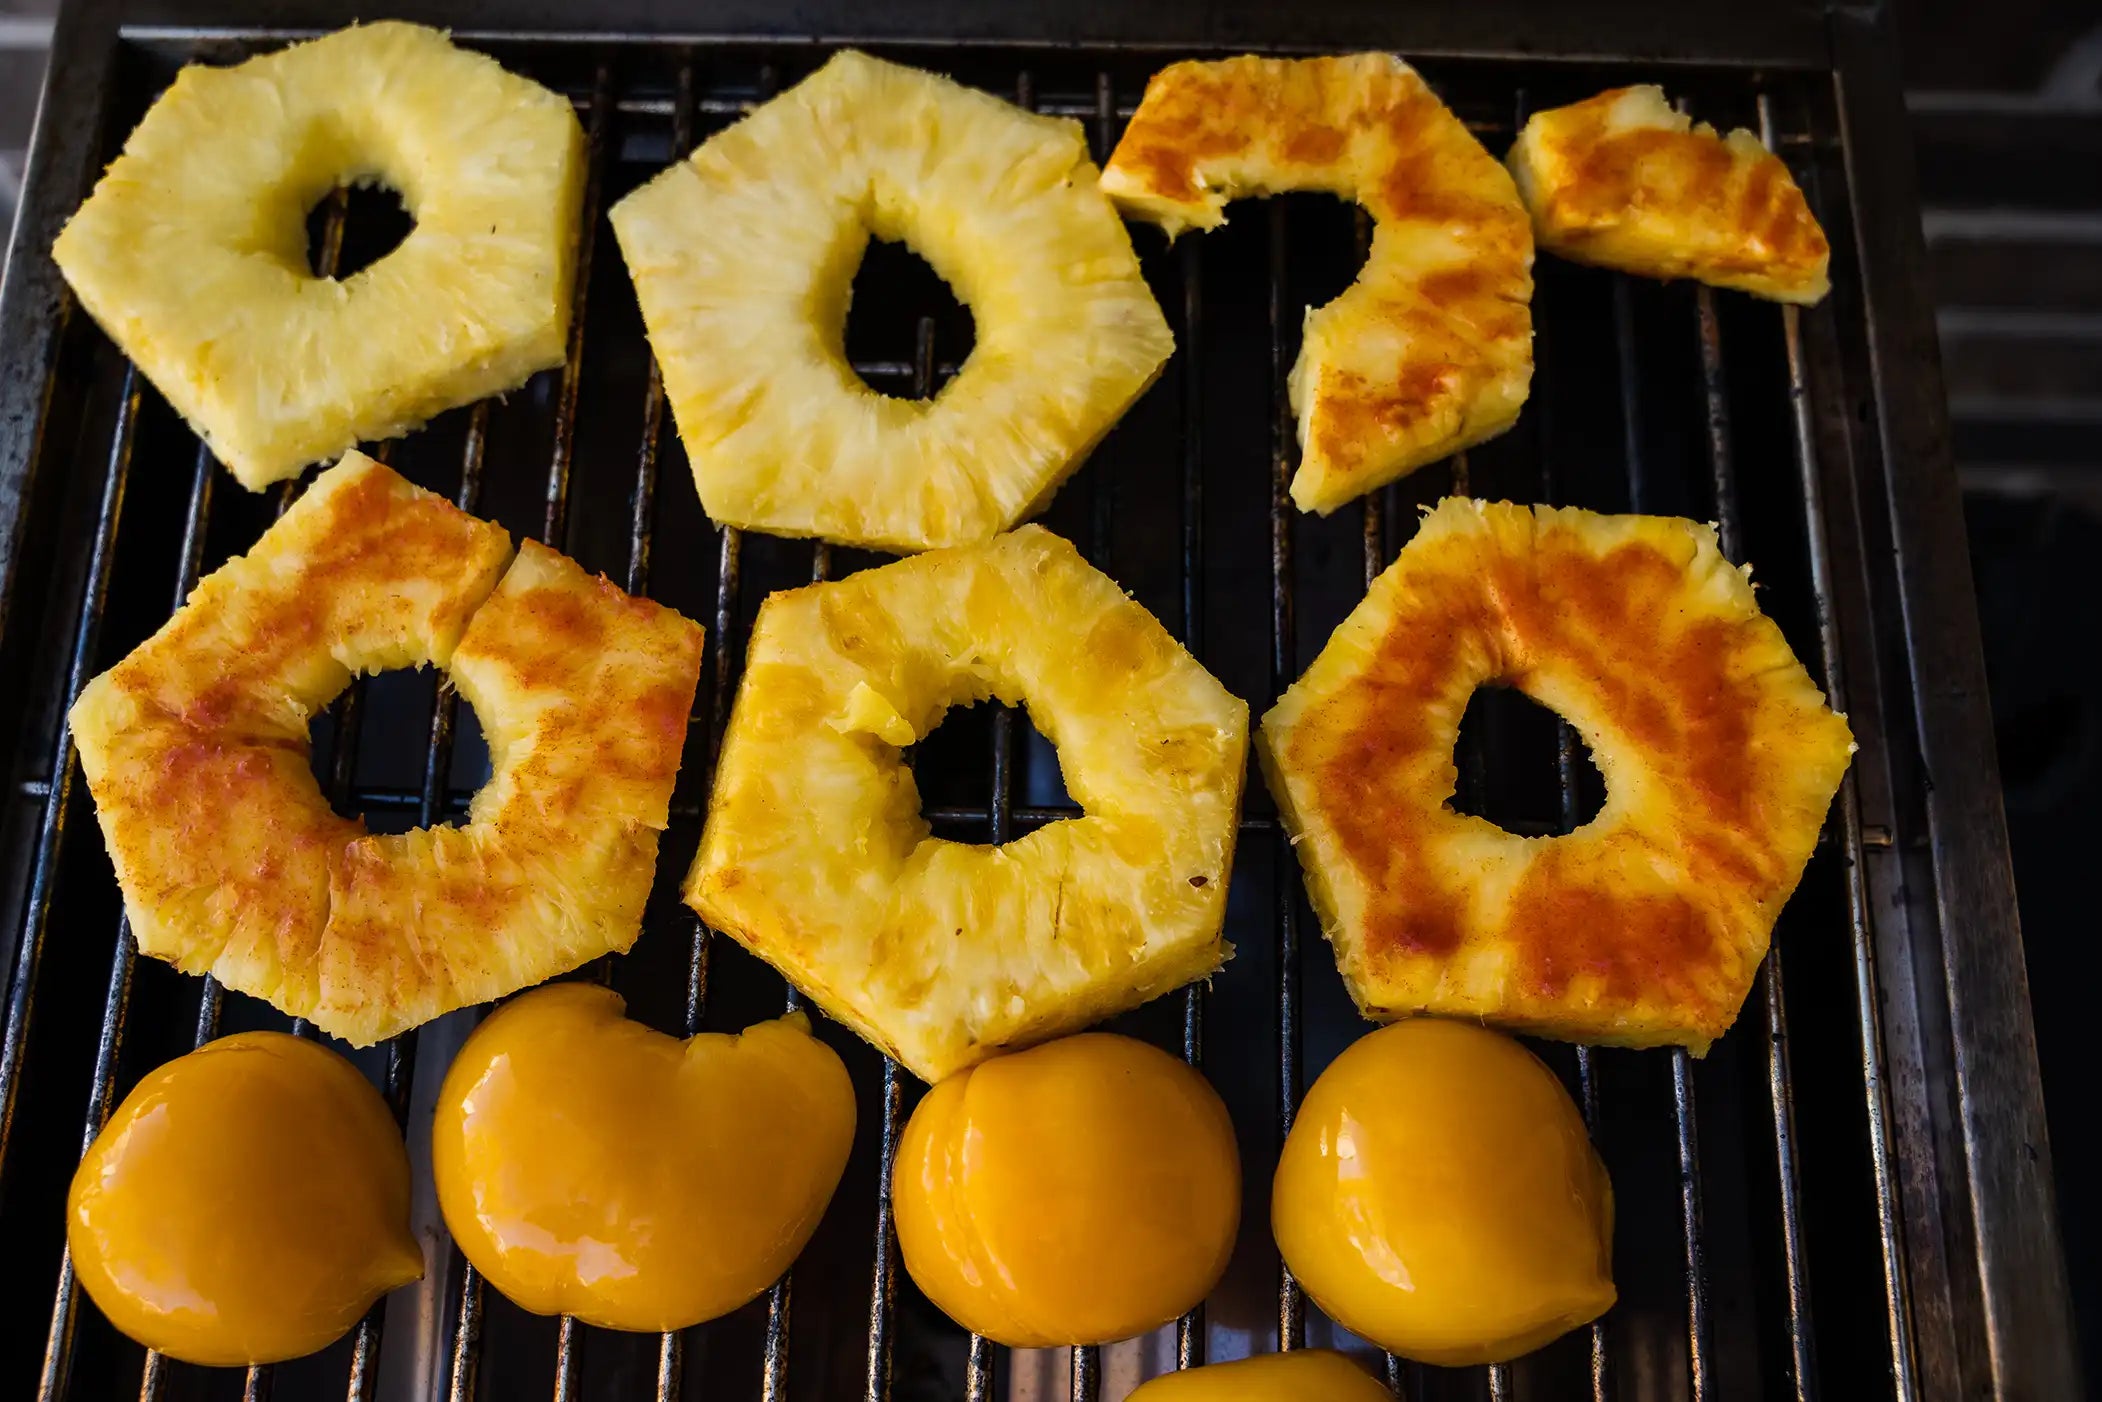 Pineapple & peaches on the grill.